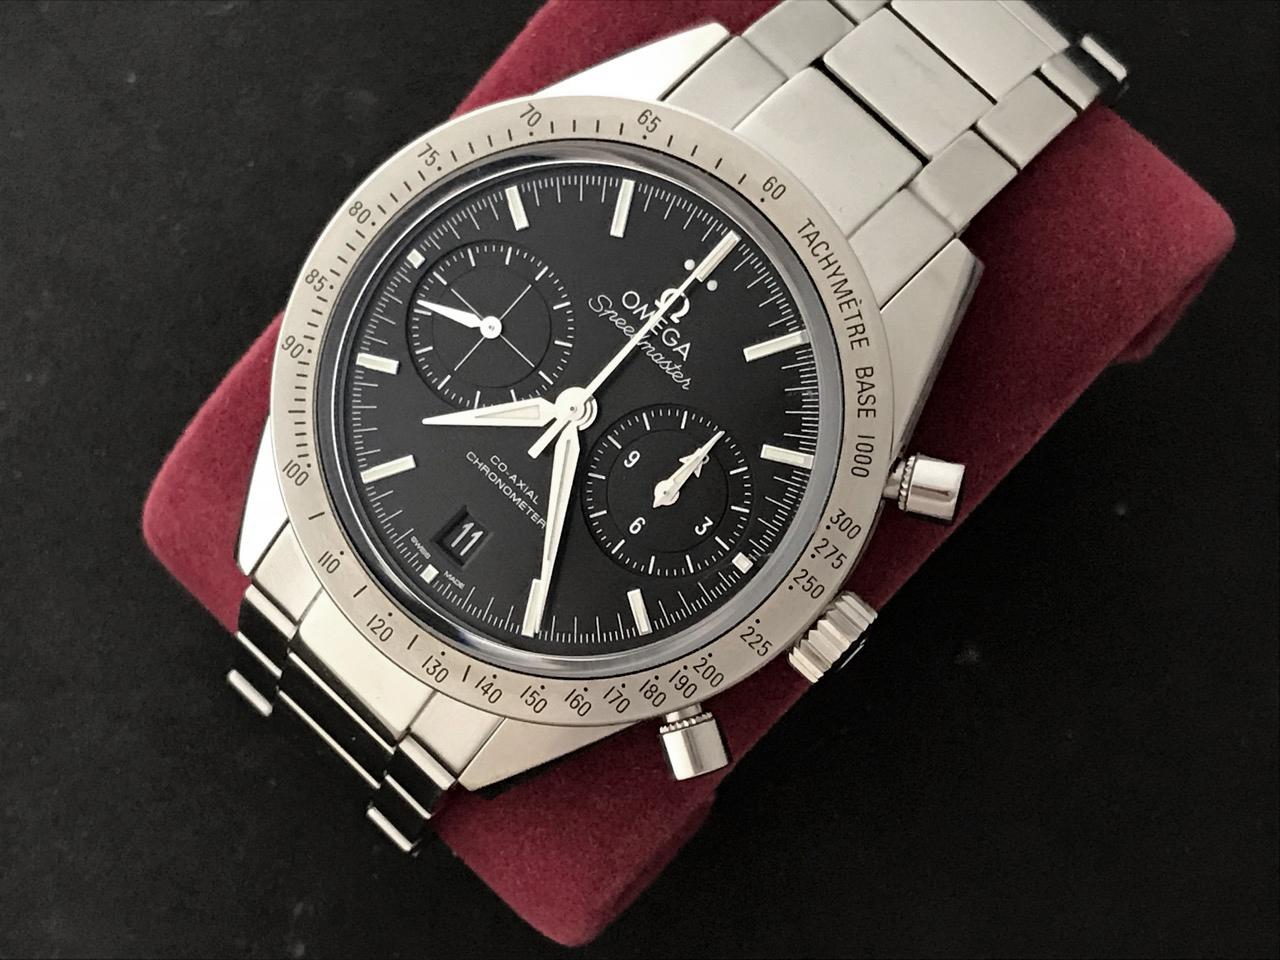 Omega Speedmaster Chronograph Men's stainless steel Model 331.10.42.51.01.001. Omega in House Caliber 9300 Automatic Winding with Date - Co-Axial Chronometer with 60 Hours Power Reserve. Stainless Steel case with steel Tachymeter bezel and